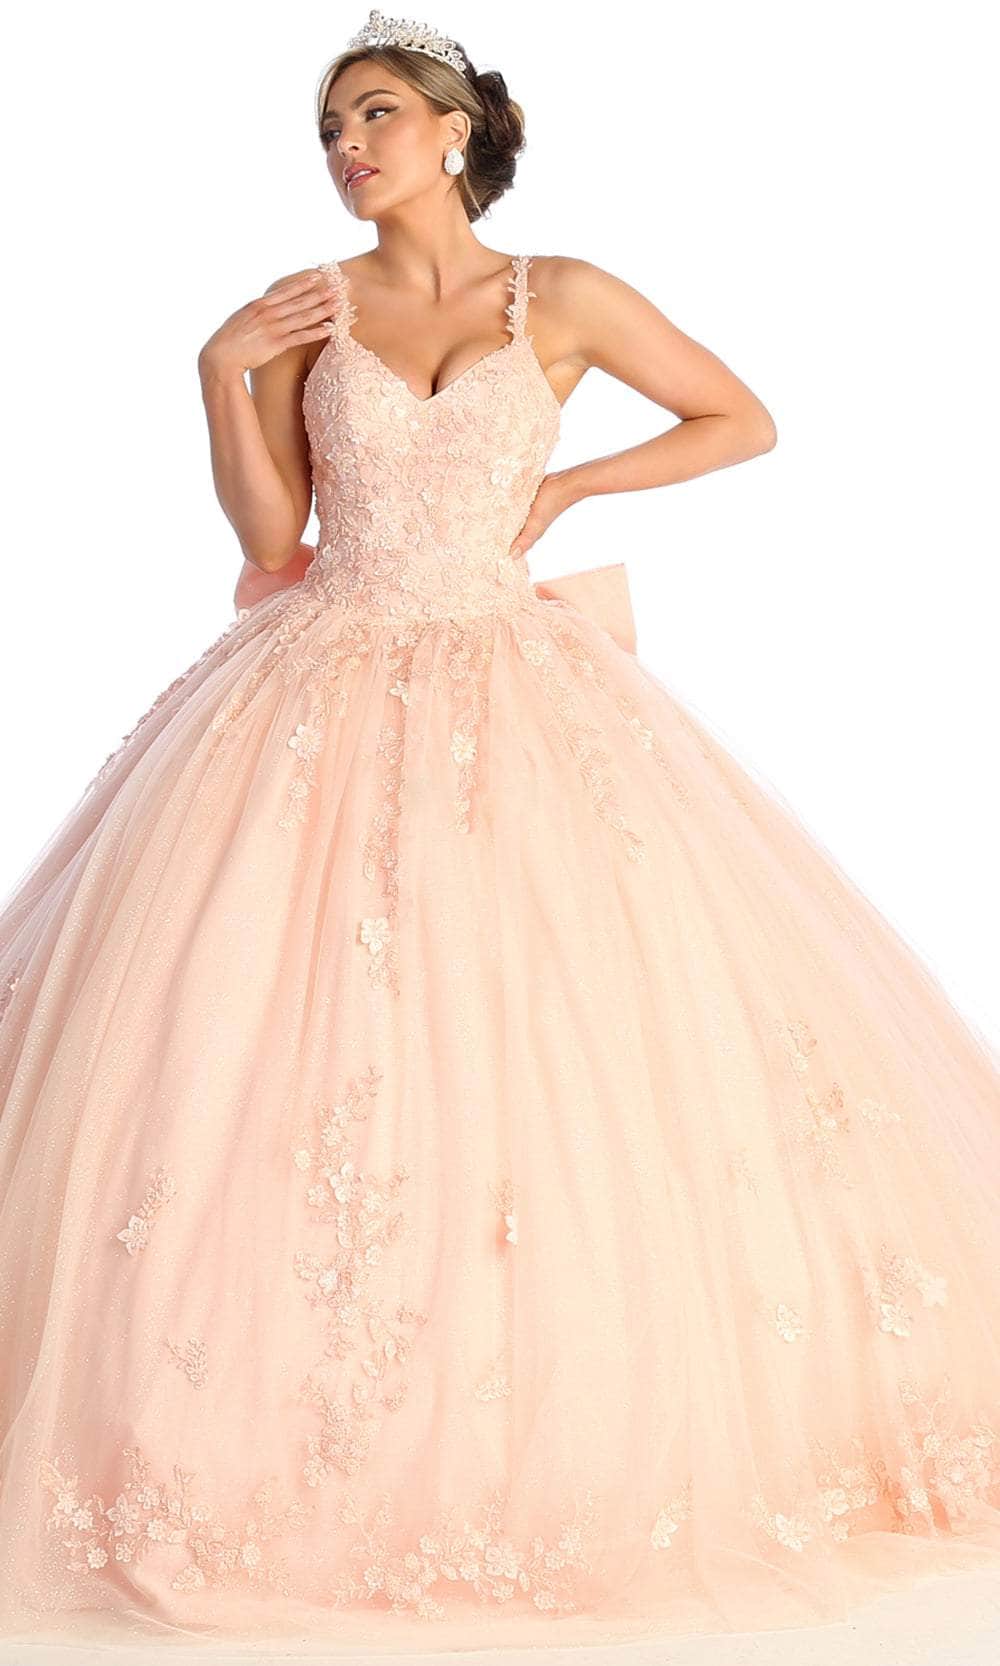 Image of May Queen LK174 - V-Neck Embroidered Prom Ballgown